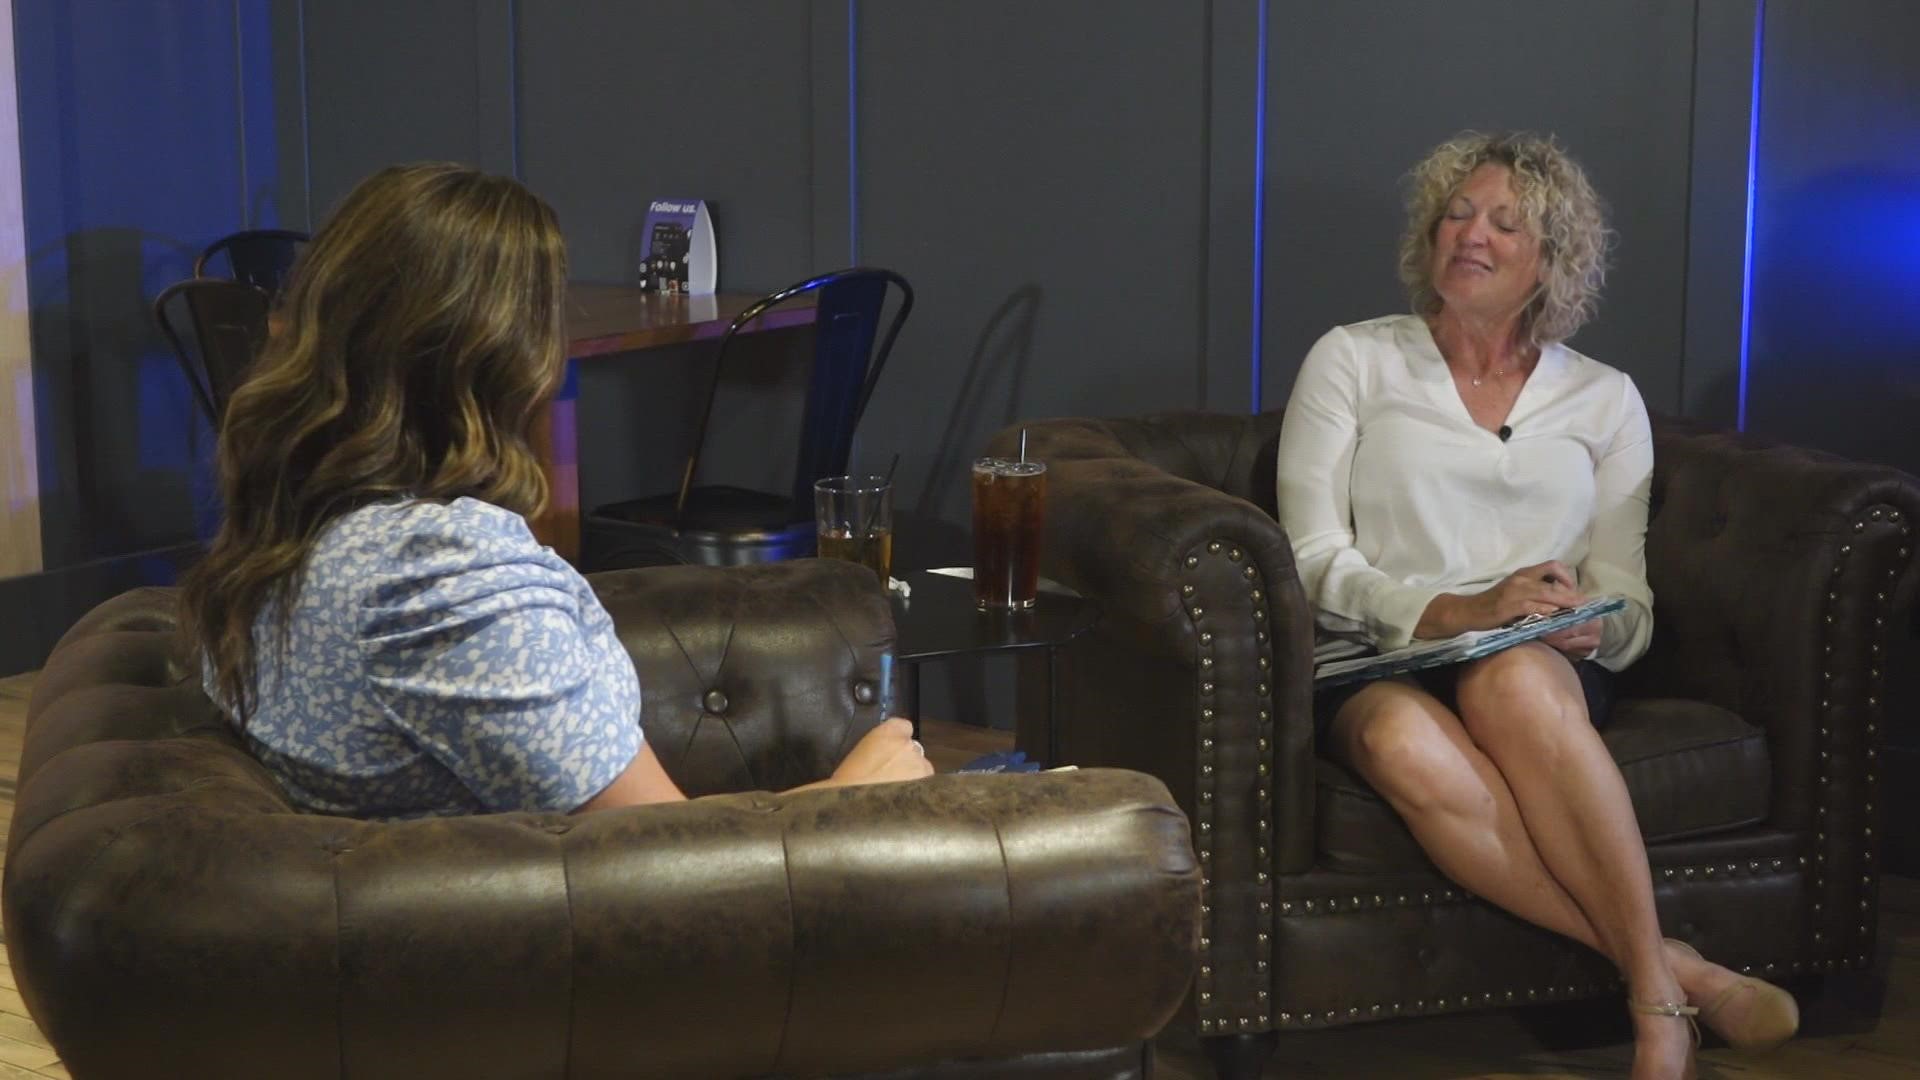 Steffanie Collins is running to be the next Spokane County Prosecutor. She joined KREM 2's Amanda Roley over tea to discuss her campaign.